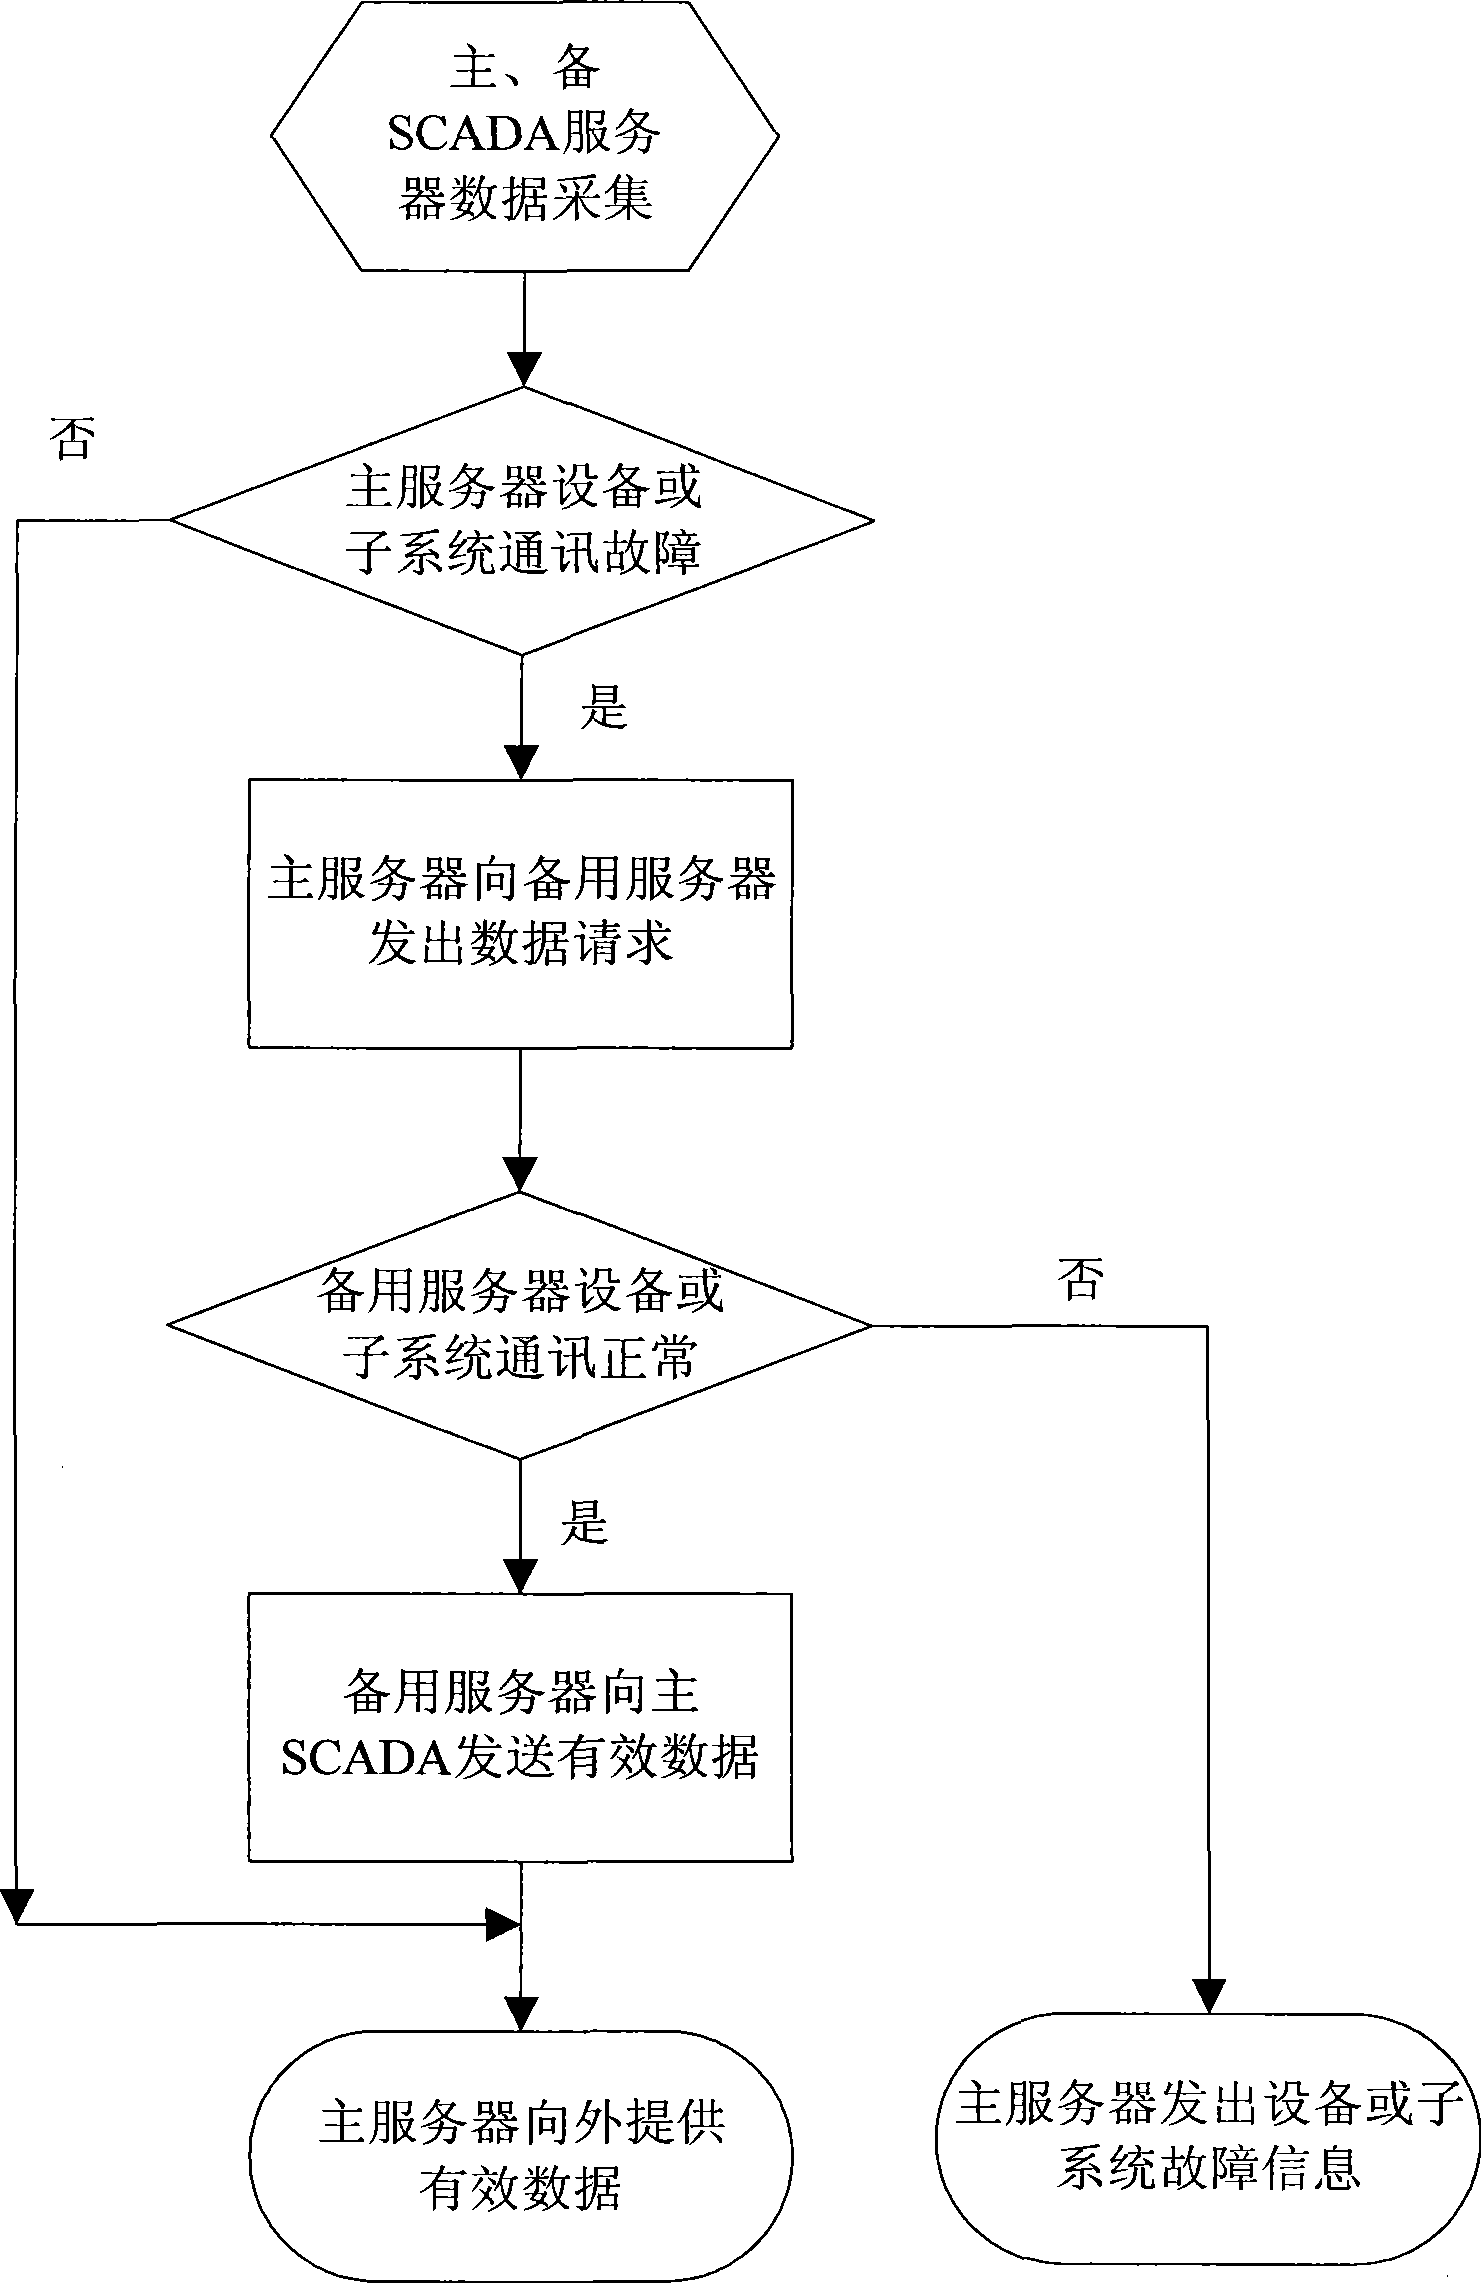 Method for controlling real-time database system